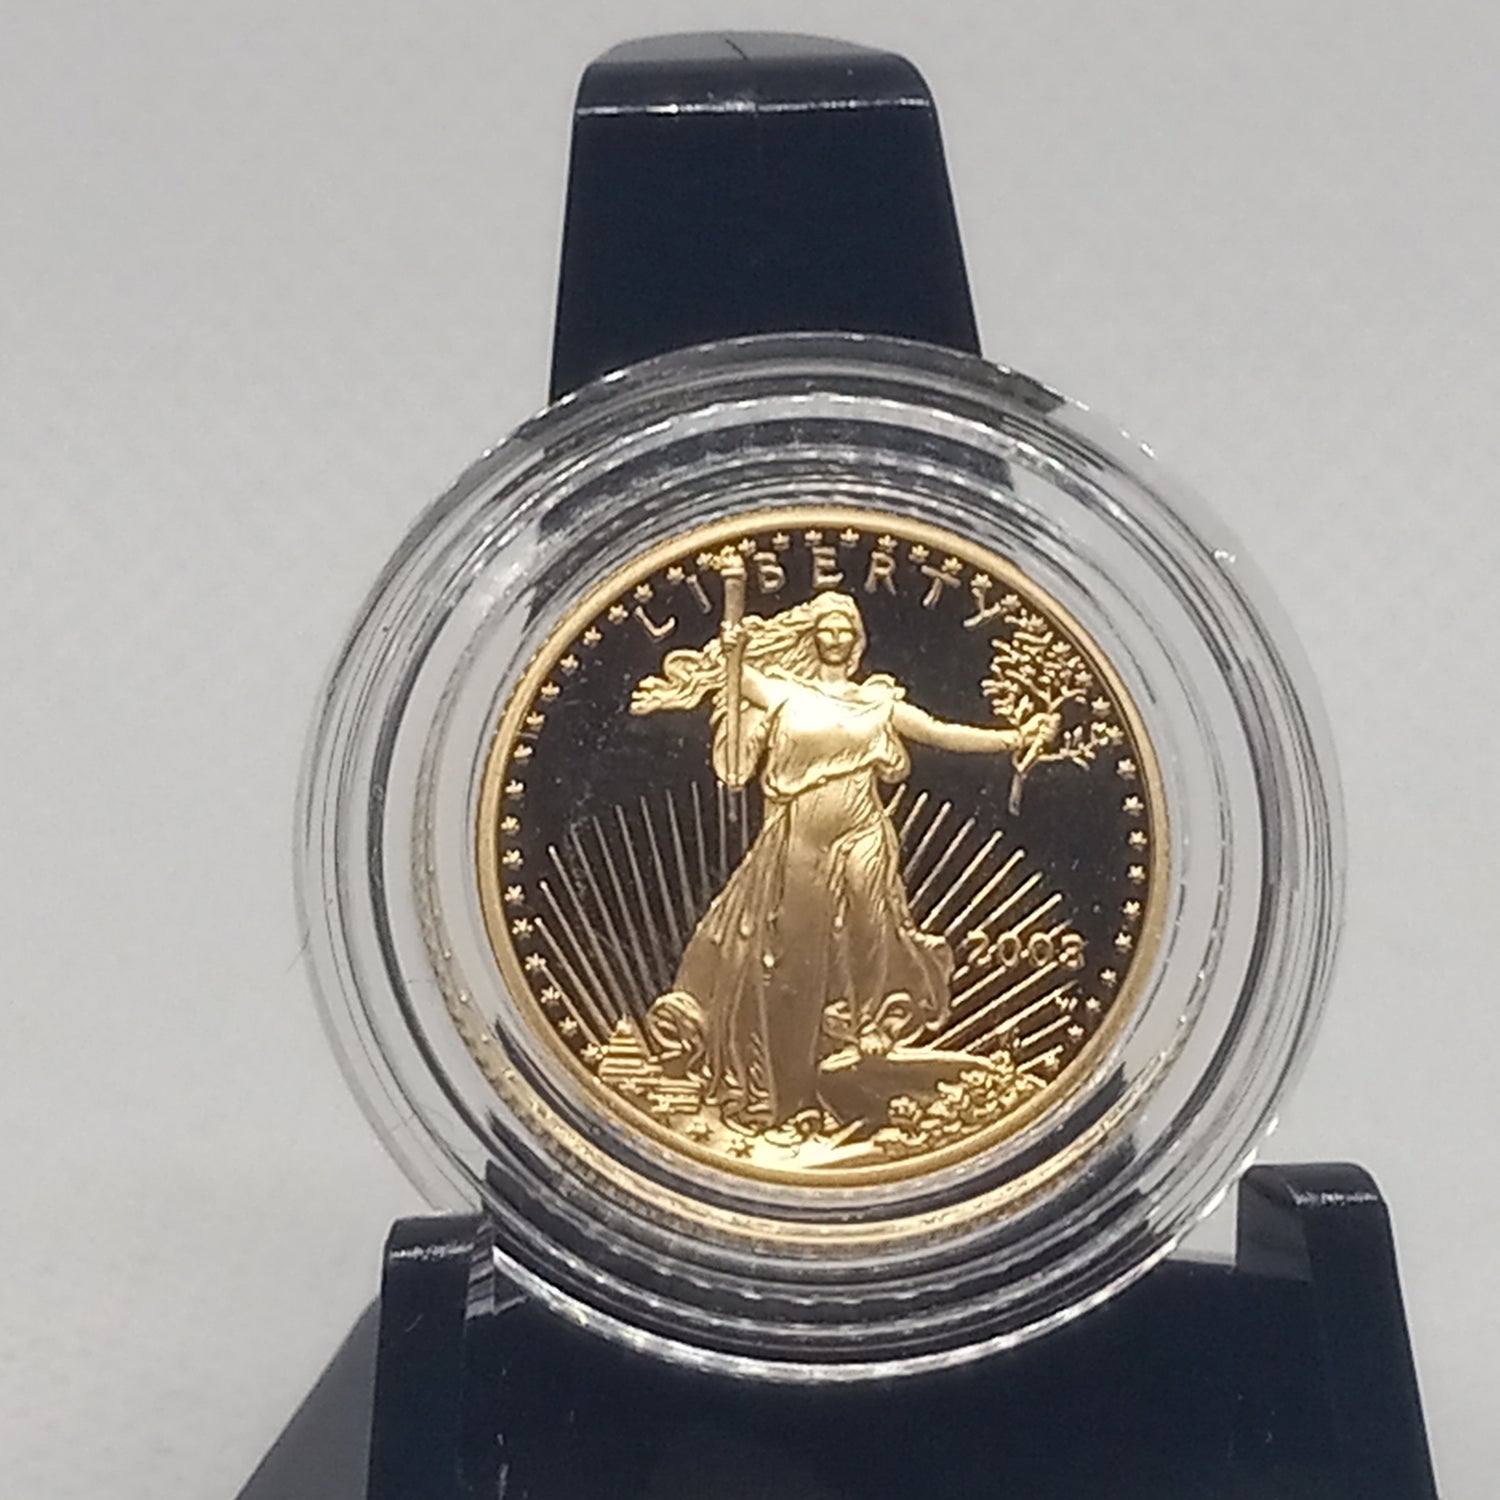 American Gold Eagles